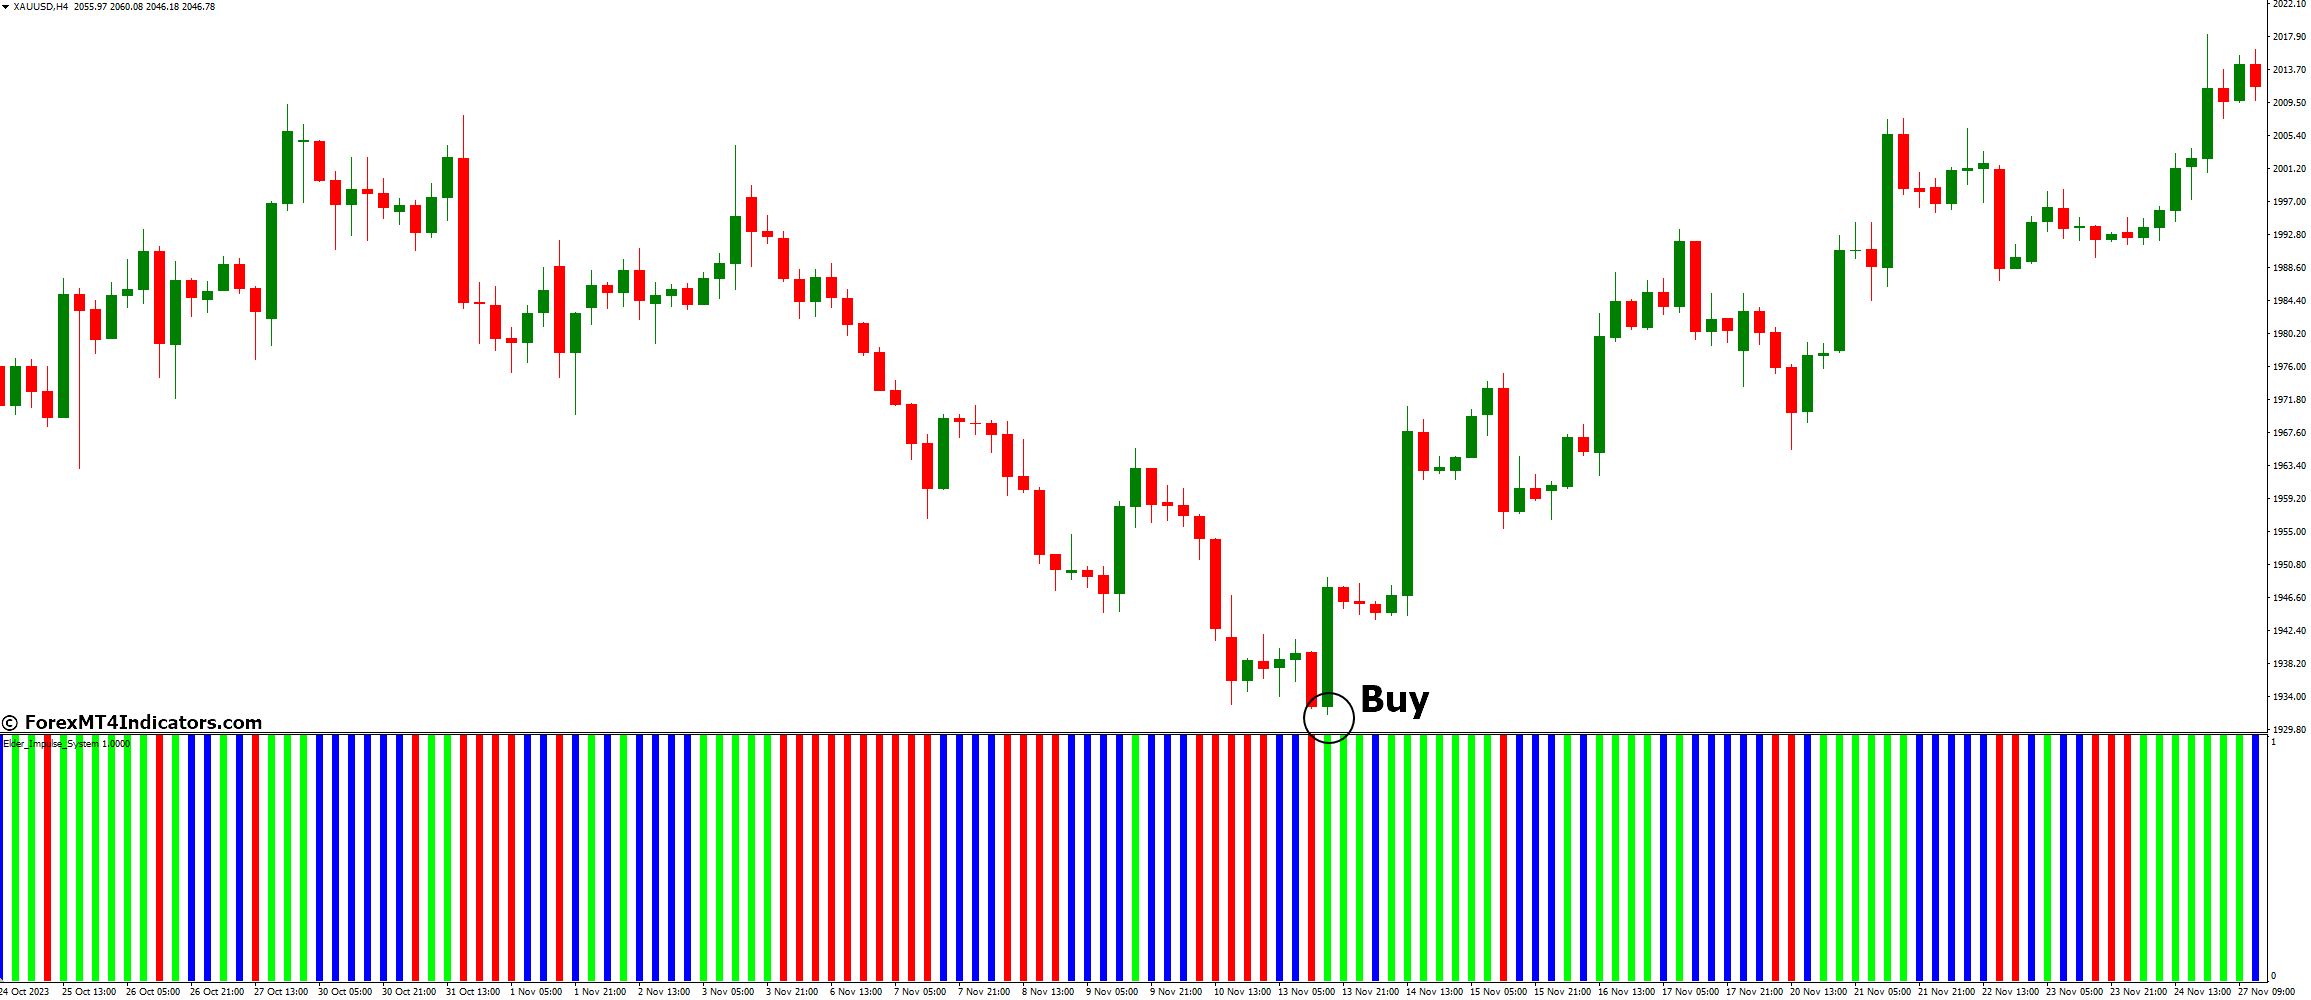 How to Trade with Elder Impulse System Indicator - Buy Entry